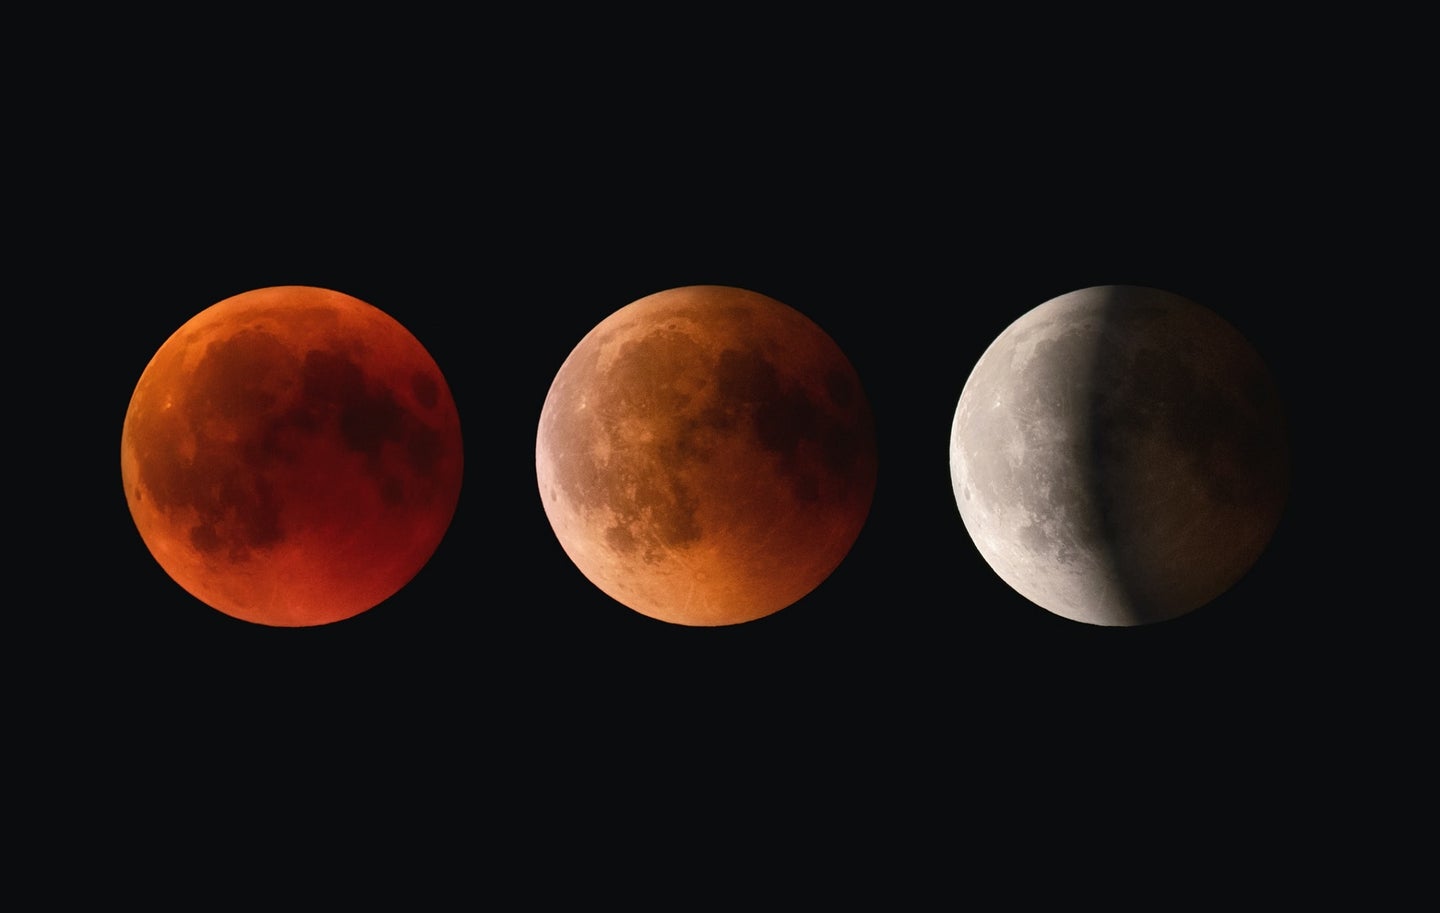 Blood moon in totality, partial lunar eclipse, and then moon in slight shadow